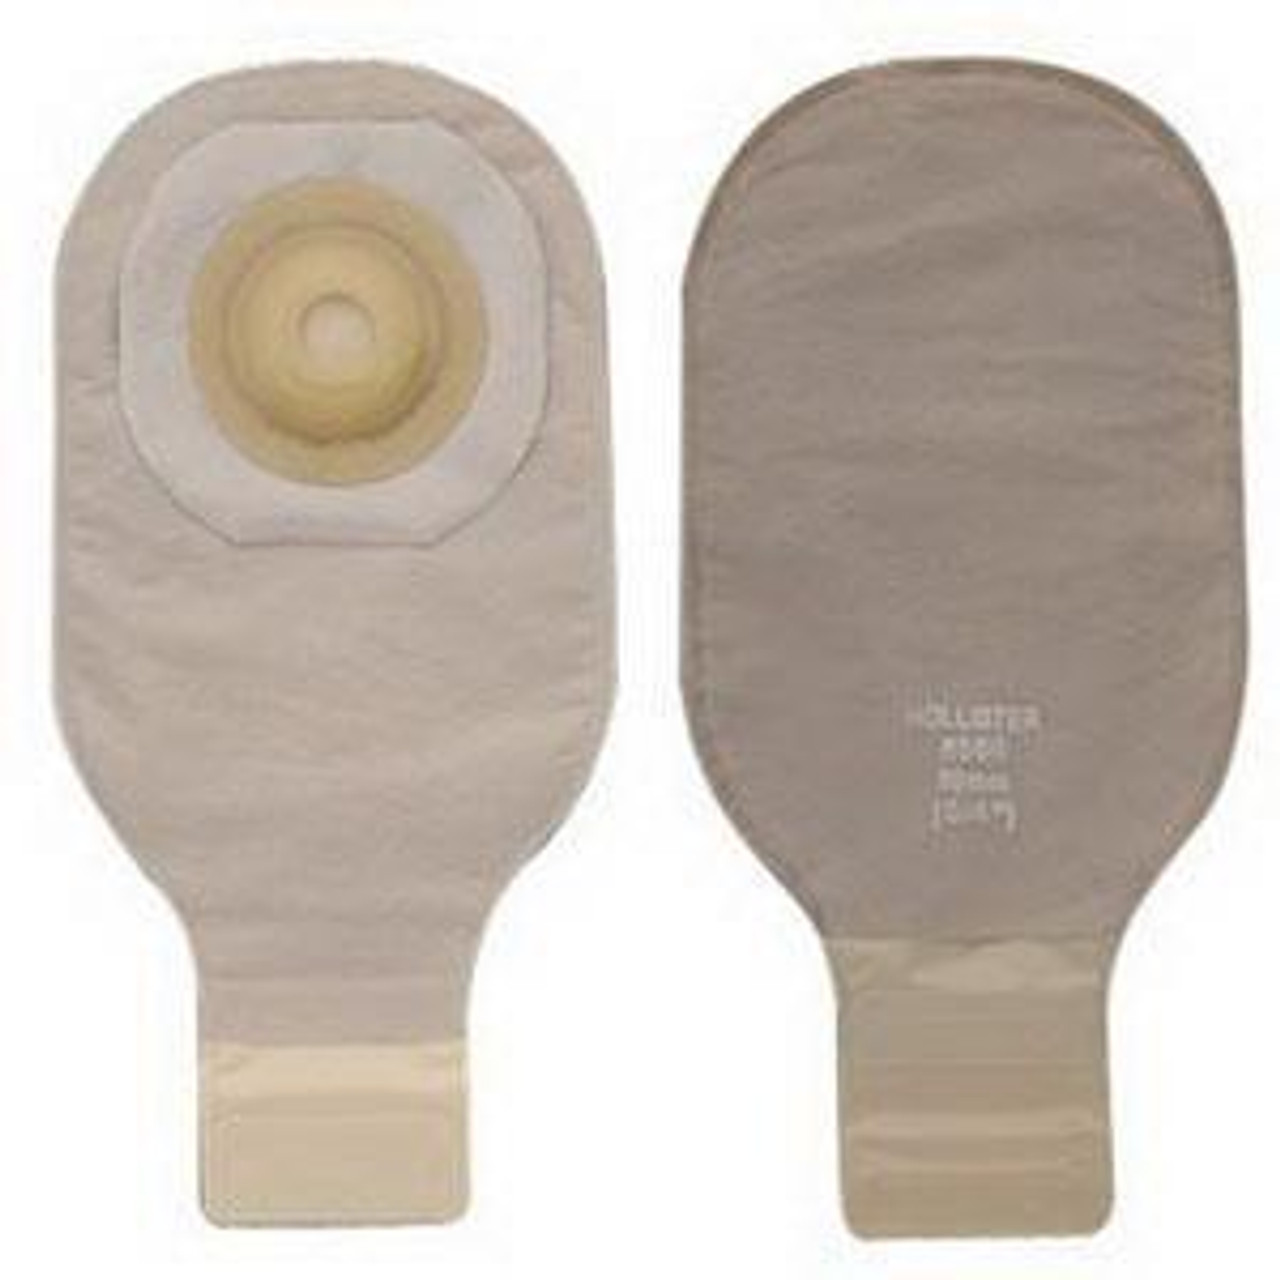 CONVEX Drainable Pouch, Pre-sized 1 3/8", BEIGE, LOCK-N-ROLL BX/5 (HOL-8595) (Hollister 8595)